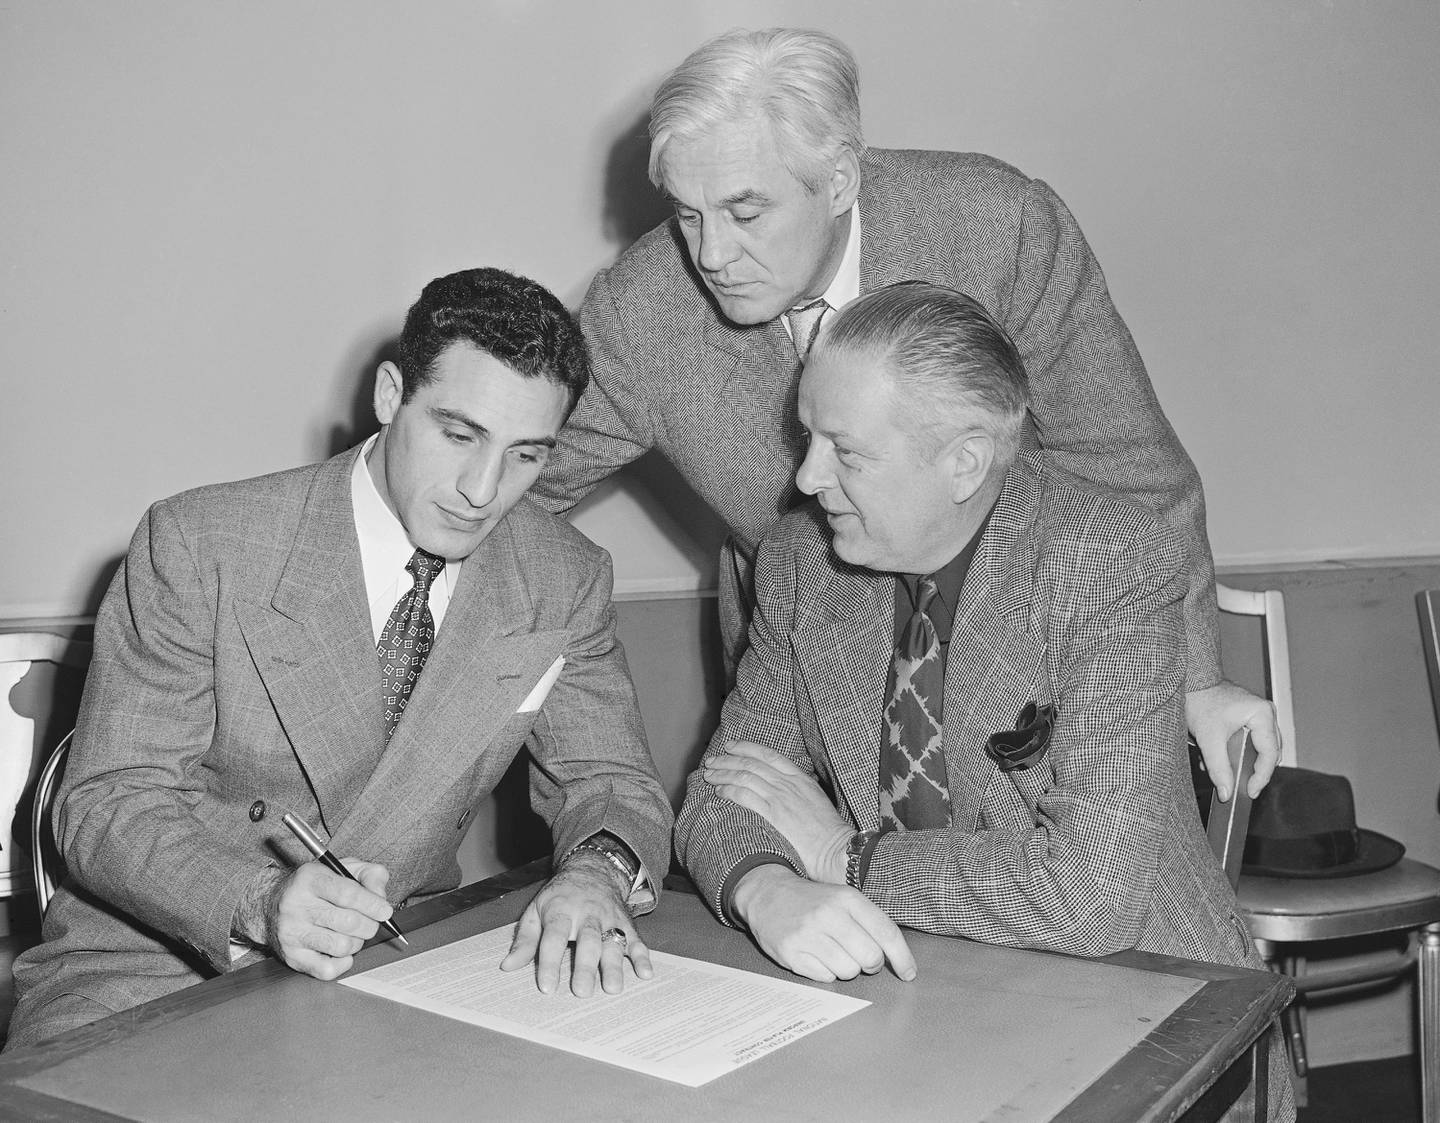 Charley Trippi, left, signs a four-year, $100,000 contract with the Chicago Cardinals on Jan. 17, 1947, in Chicago, as coach Jimmy Conzelman, center, and owner Charles Bidwell watch.